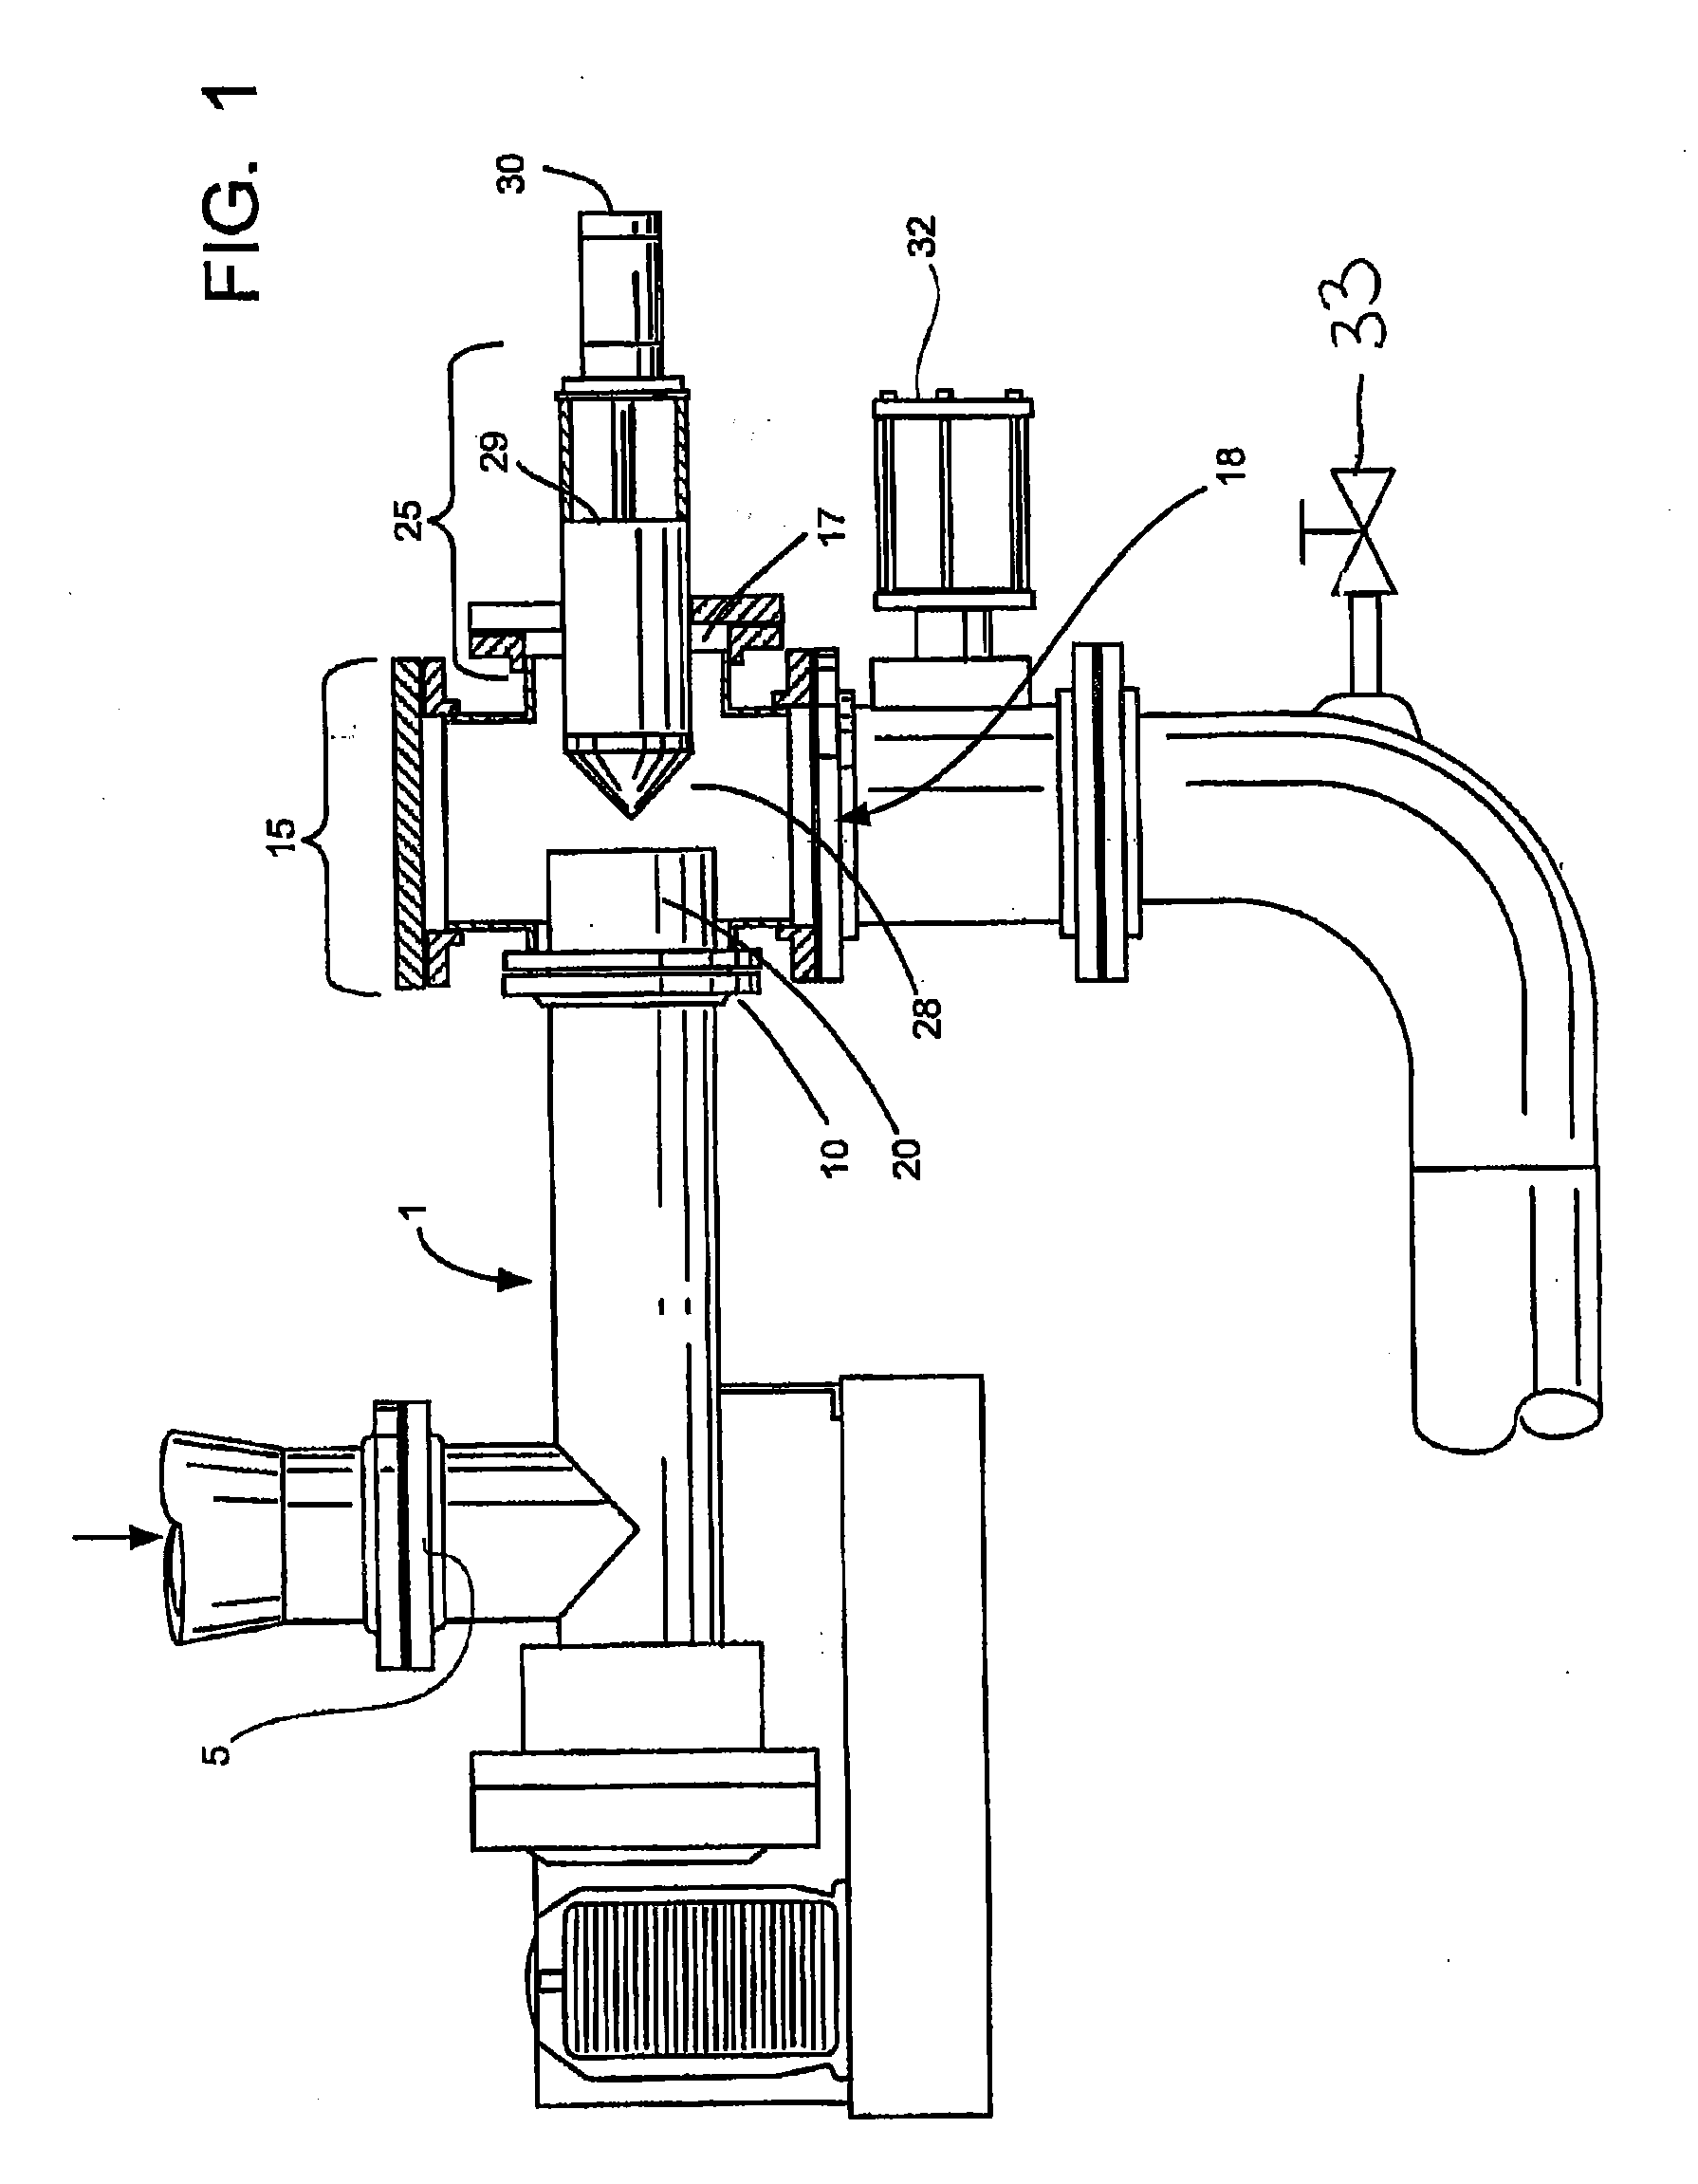 Apparatus to convey material to a pressurized vessel and method for the same